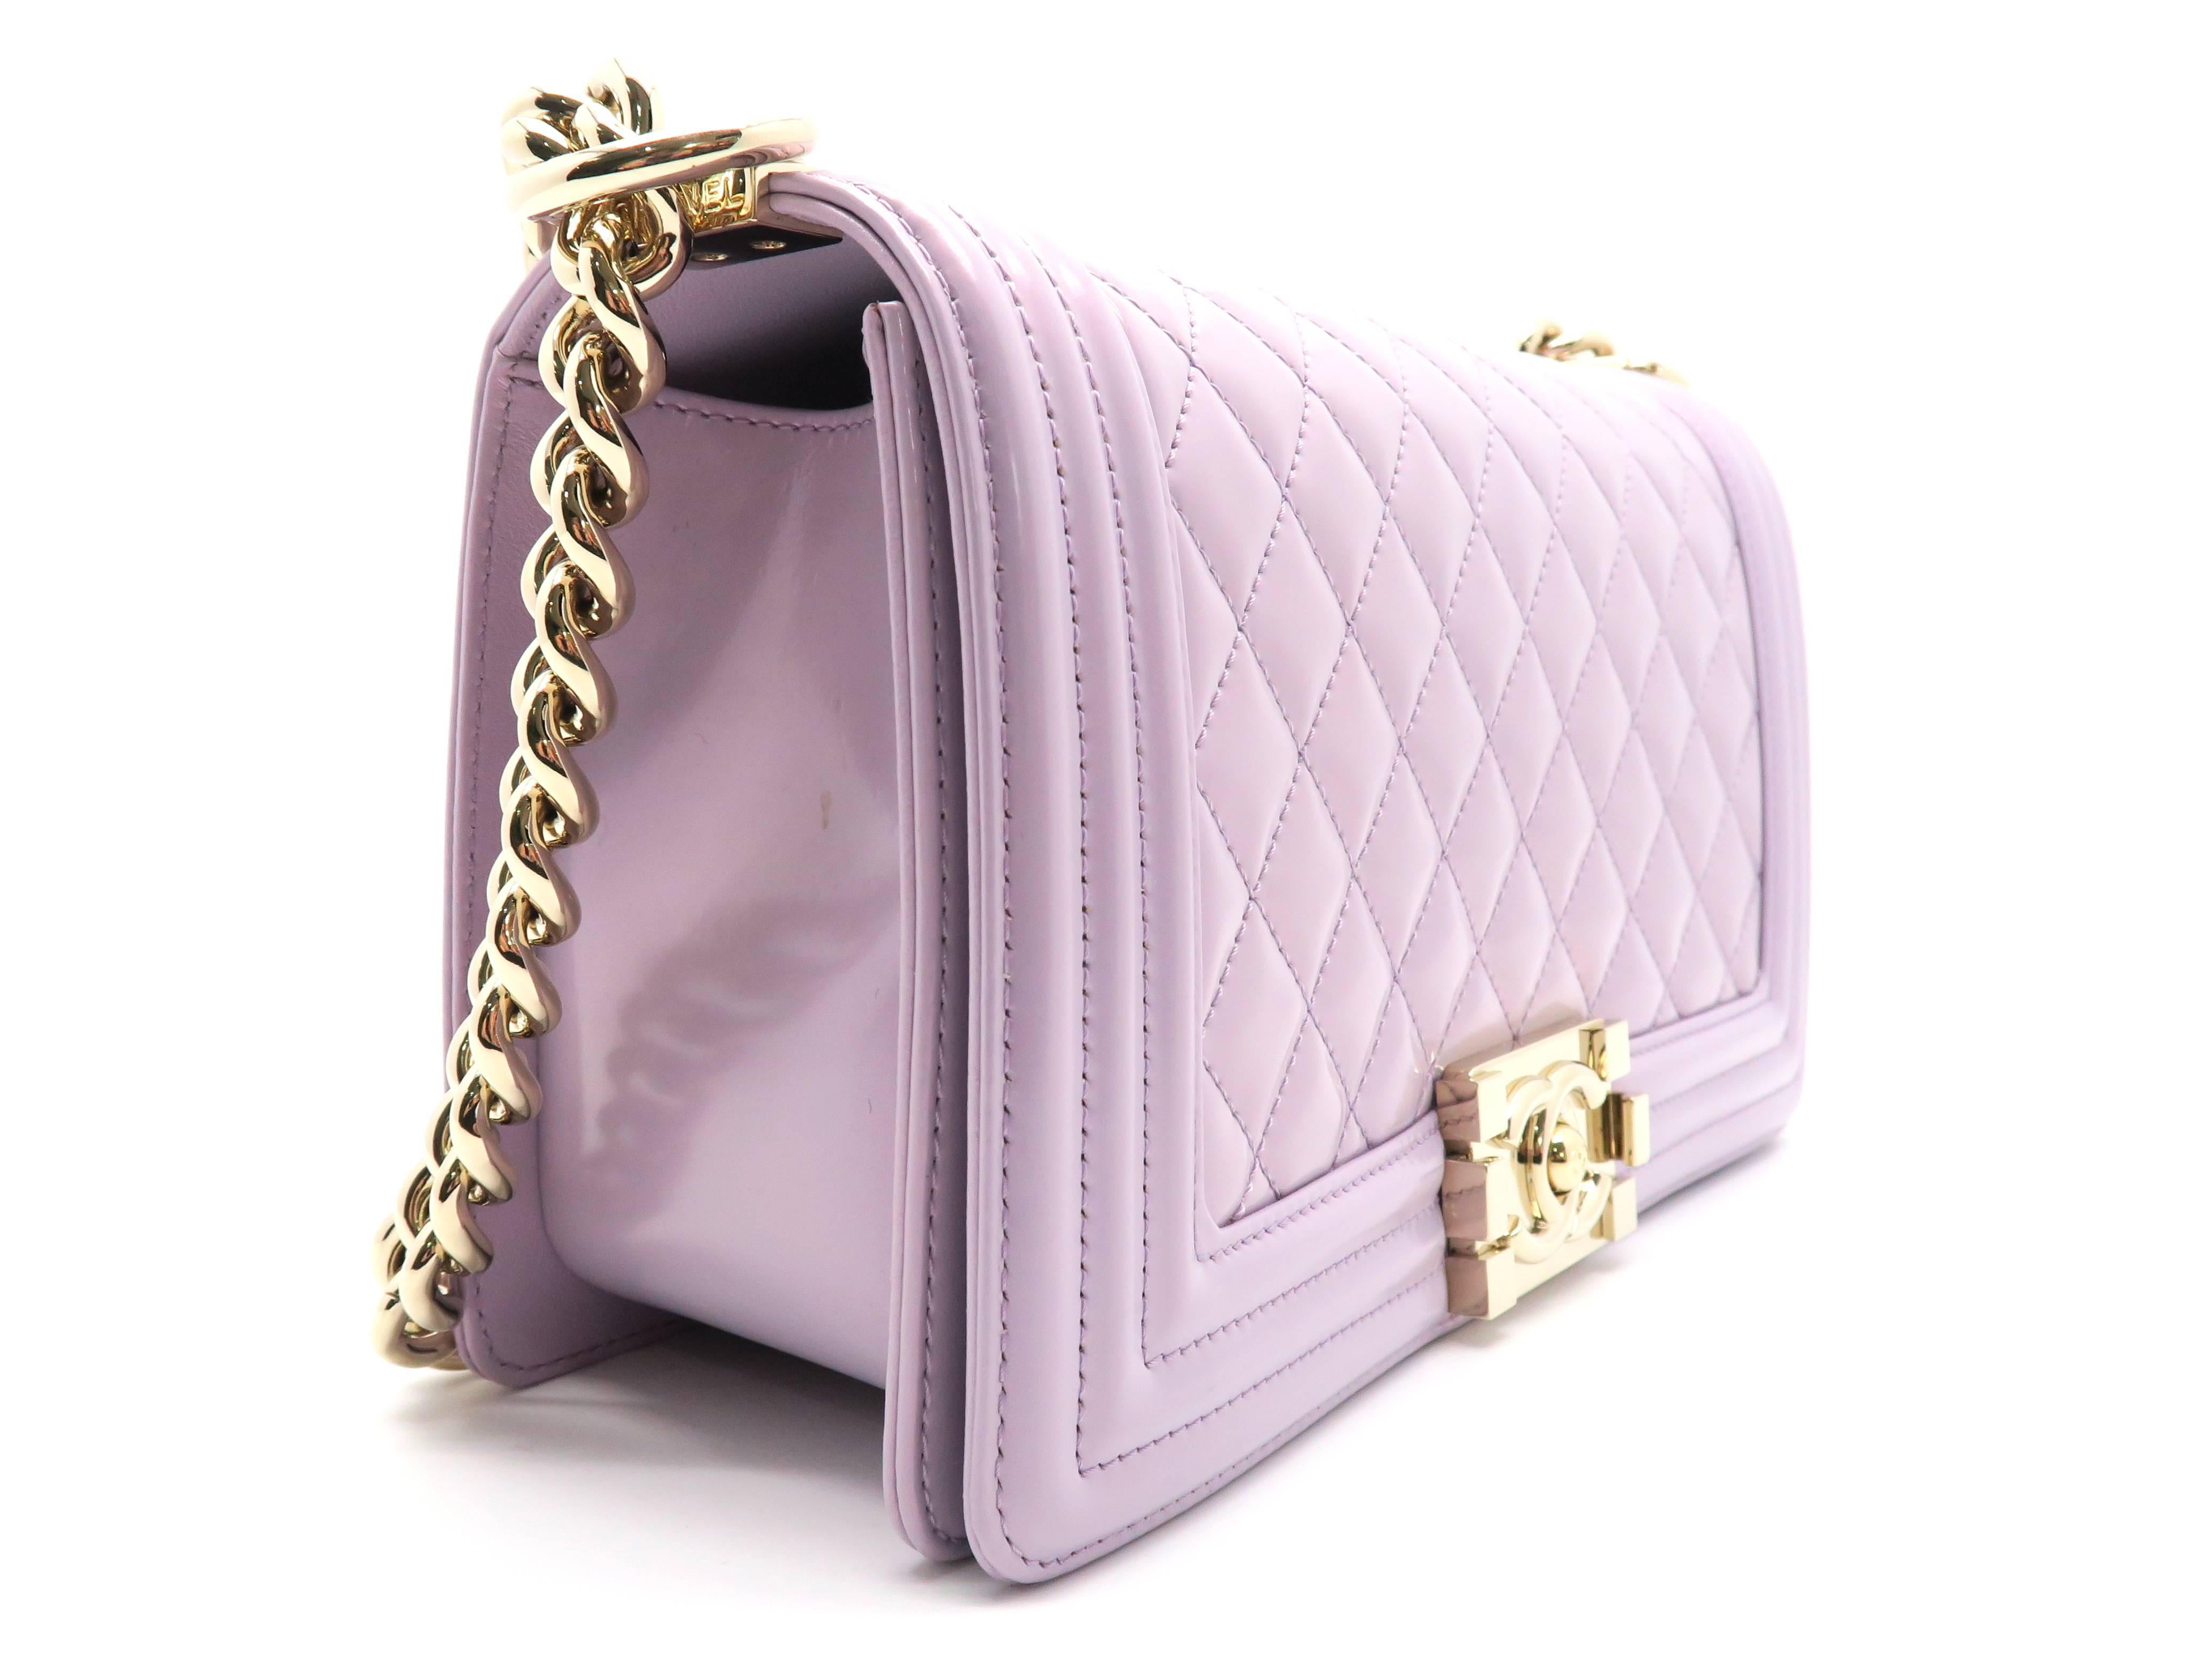 Color: Light Purple 

Material: Patent Leather

Condition: Rank S 
Overall: Almost New
Surface: Minor Scratches
Corners: Good
Edges: Minor Scratches
Handles/Straps: Good
Hardware: Good

Dimension: W25 × H14 × D8cm（W9.8" × H5.5" ×